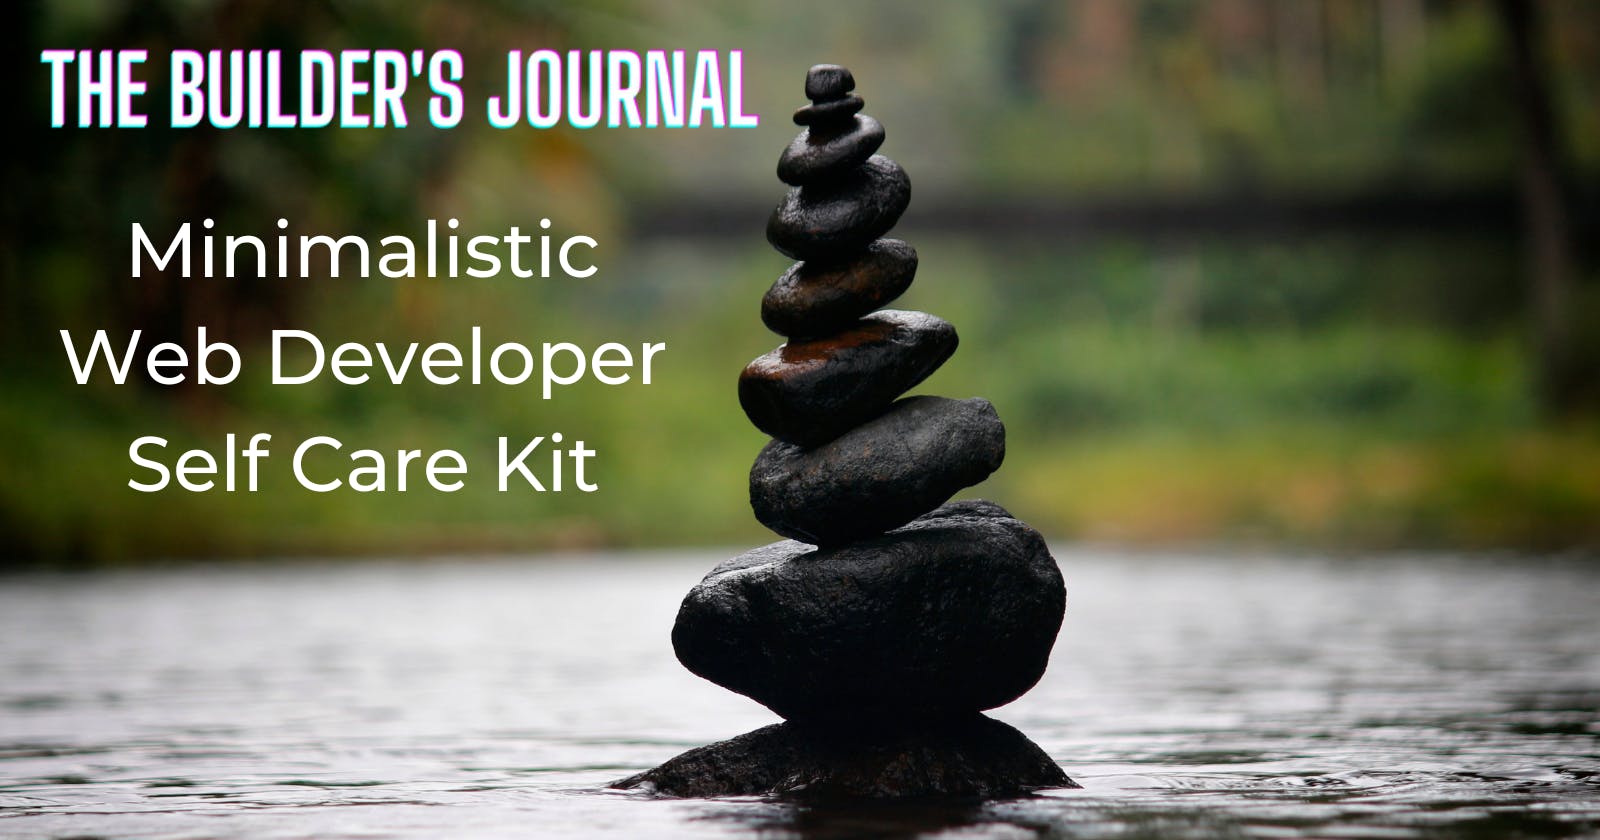 Take This With You: The Minimalistic Web Developer Self Care Kit